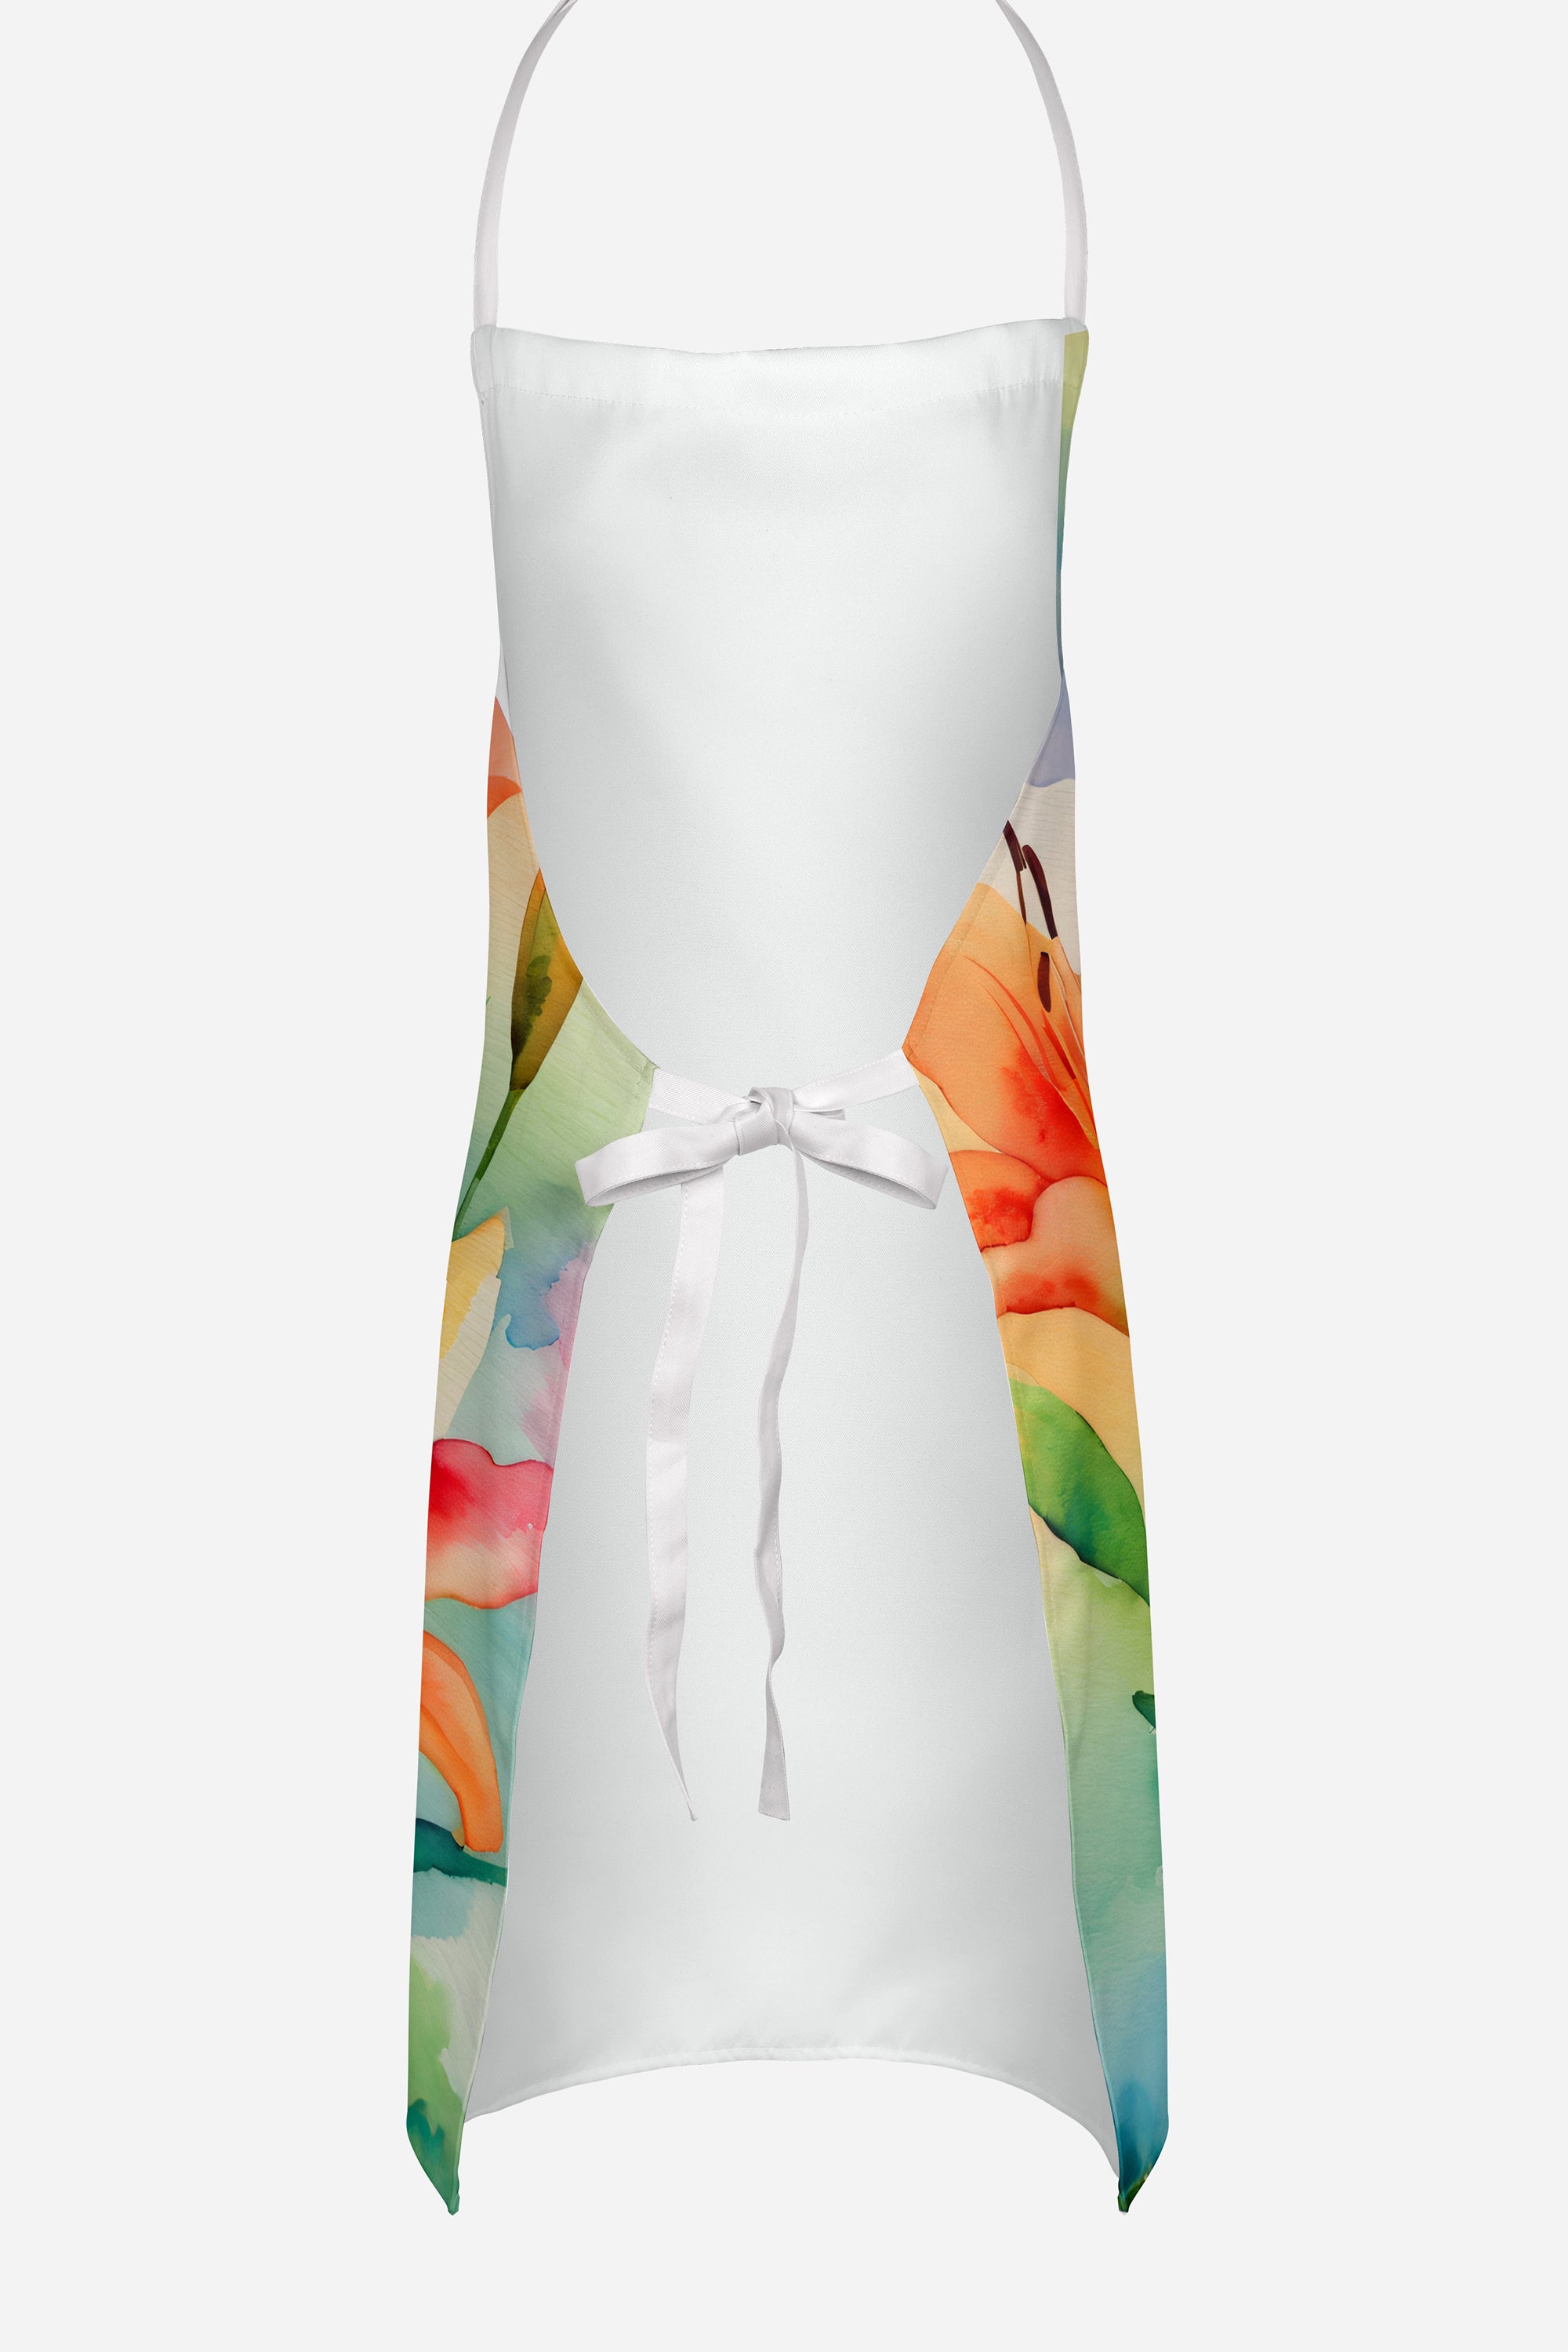 Lilies in Watercolor Apron